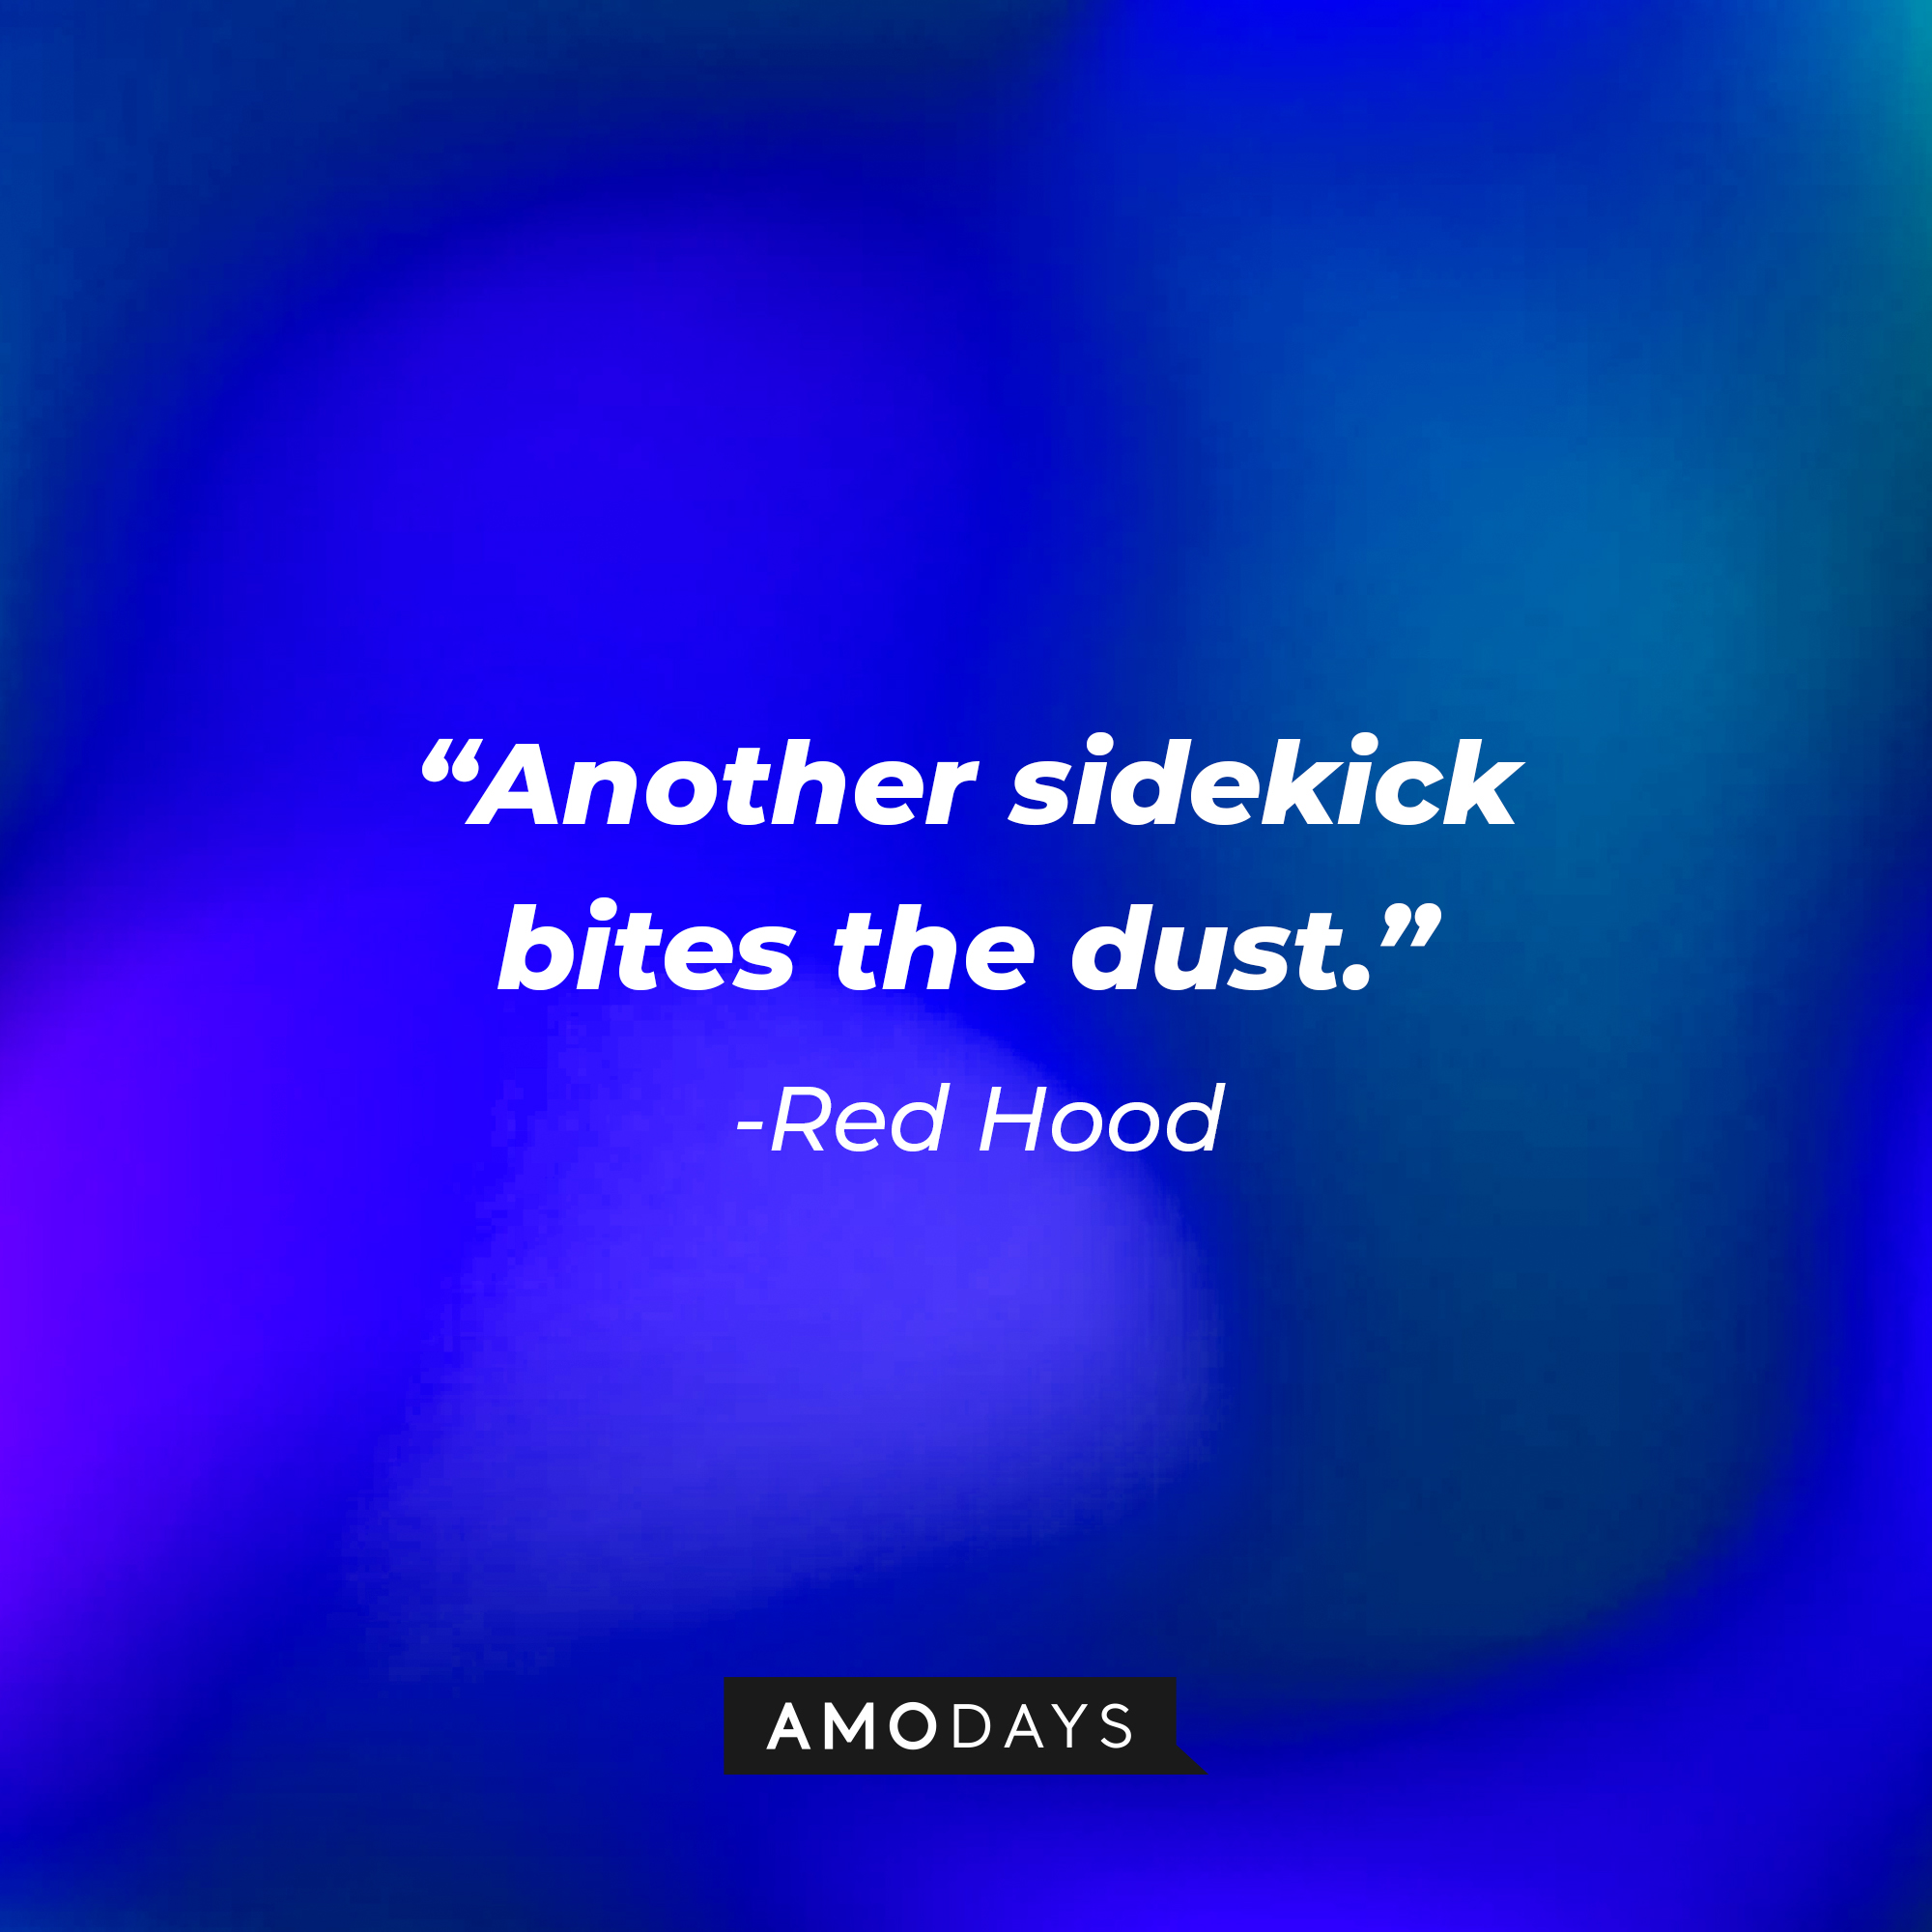 Red Hood’s quote: "Another sidekick bites the dust." | Source: AmoDays